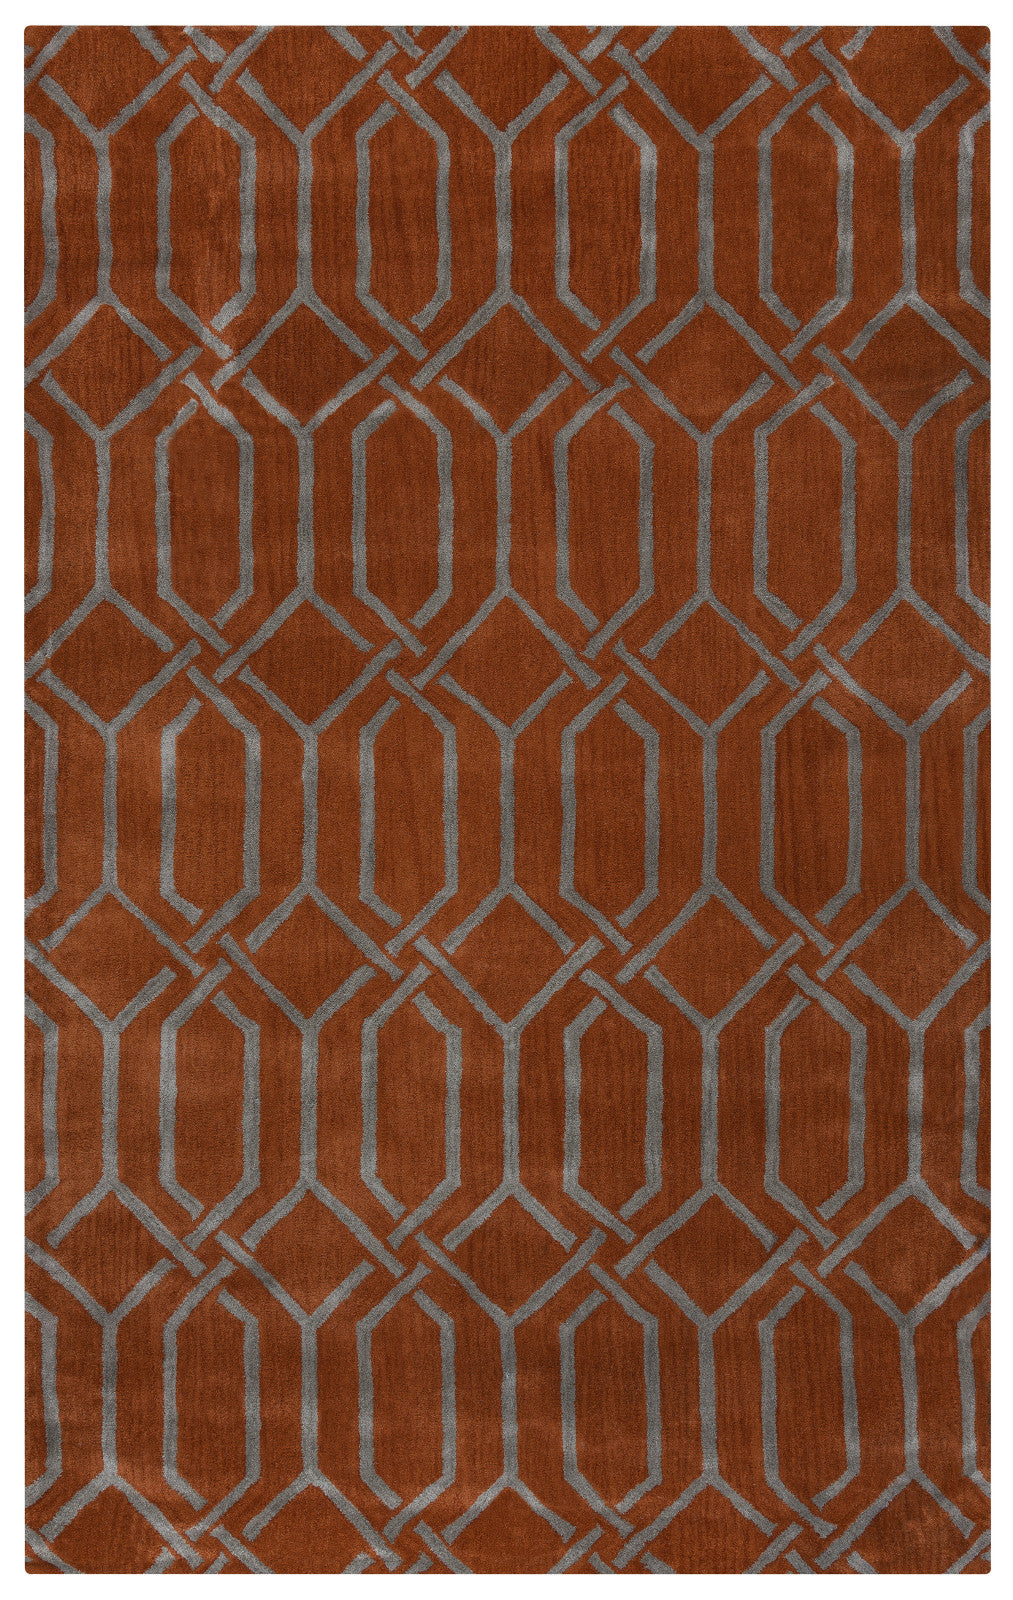 Rizzy Marianna Fields MF9452 Red Area Rug